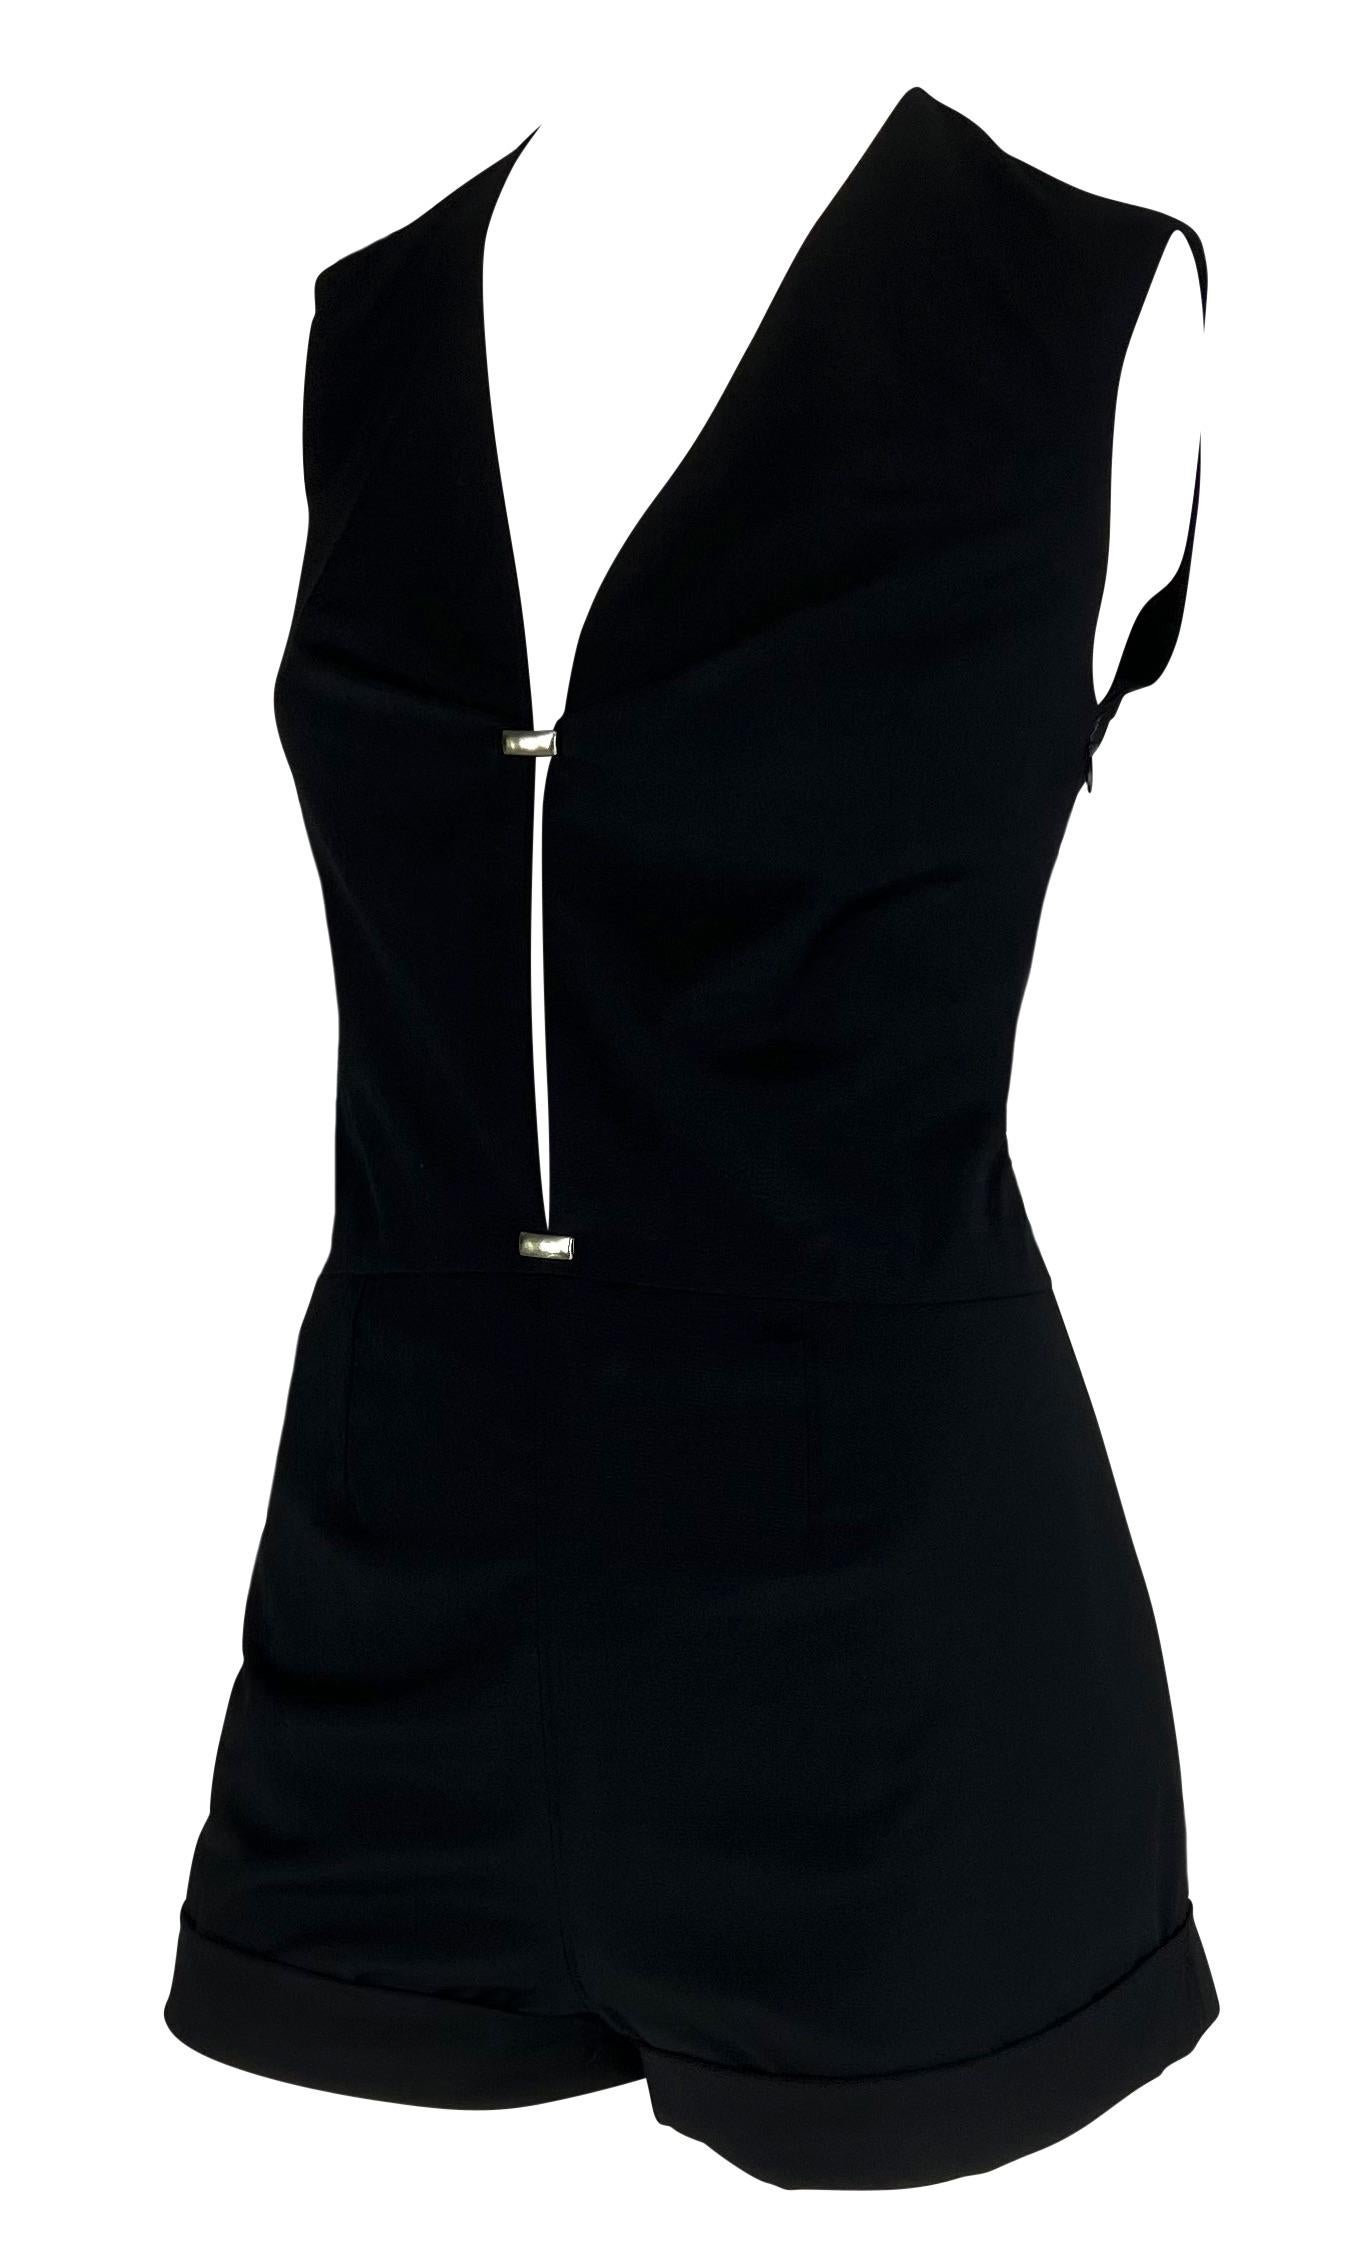 2000s Thierry Mugler Couture Black Plunging Cut Out Short Romper In Excellent Condition For Sale In West Hollywood, CA